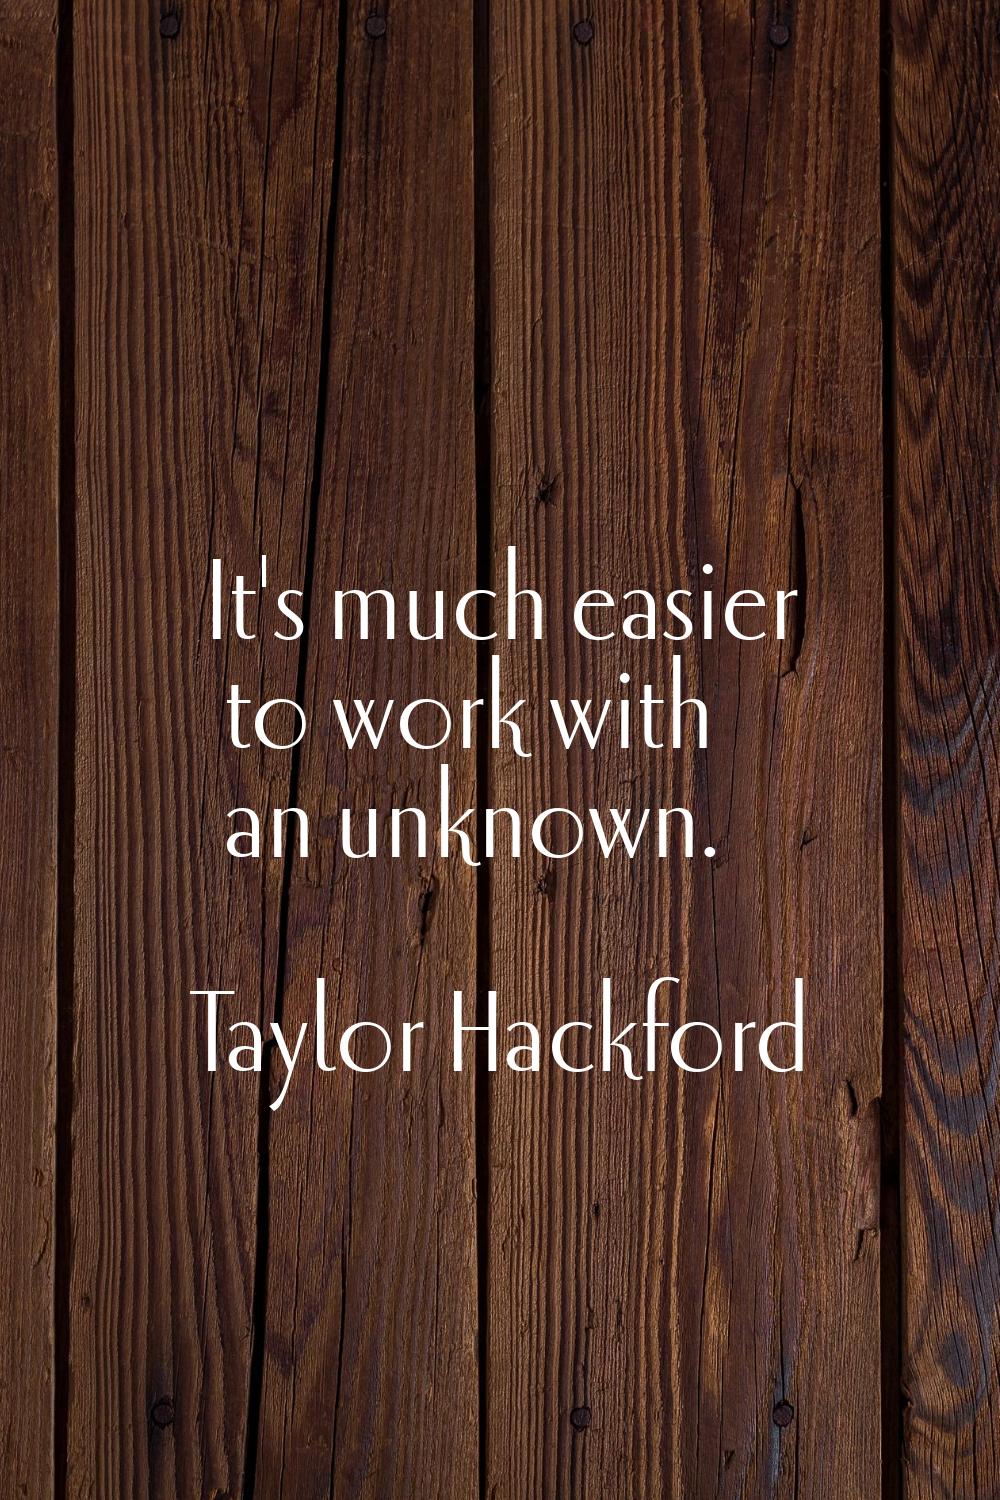 It's much easier to work with an unknown.